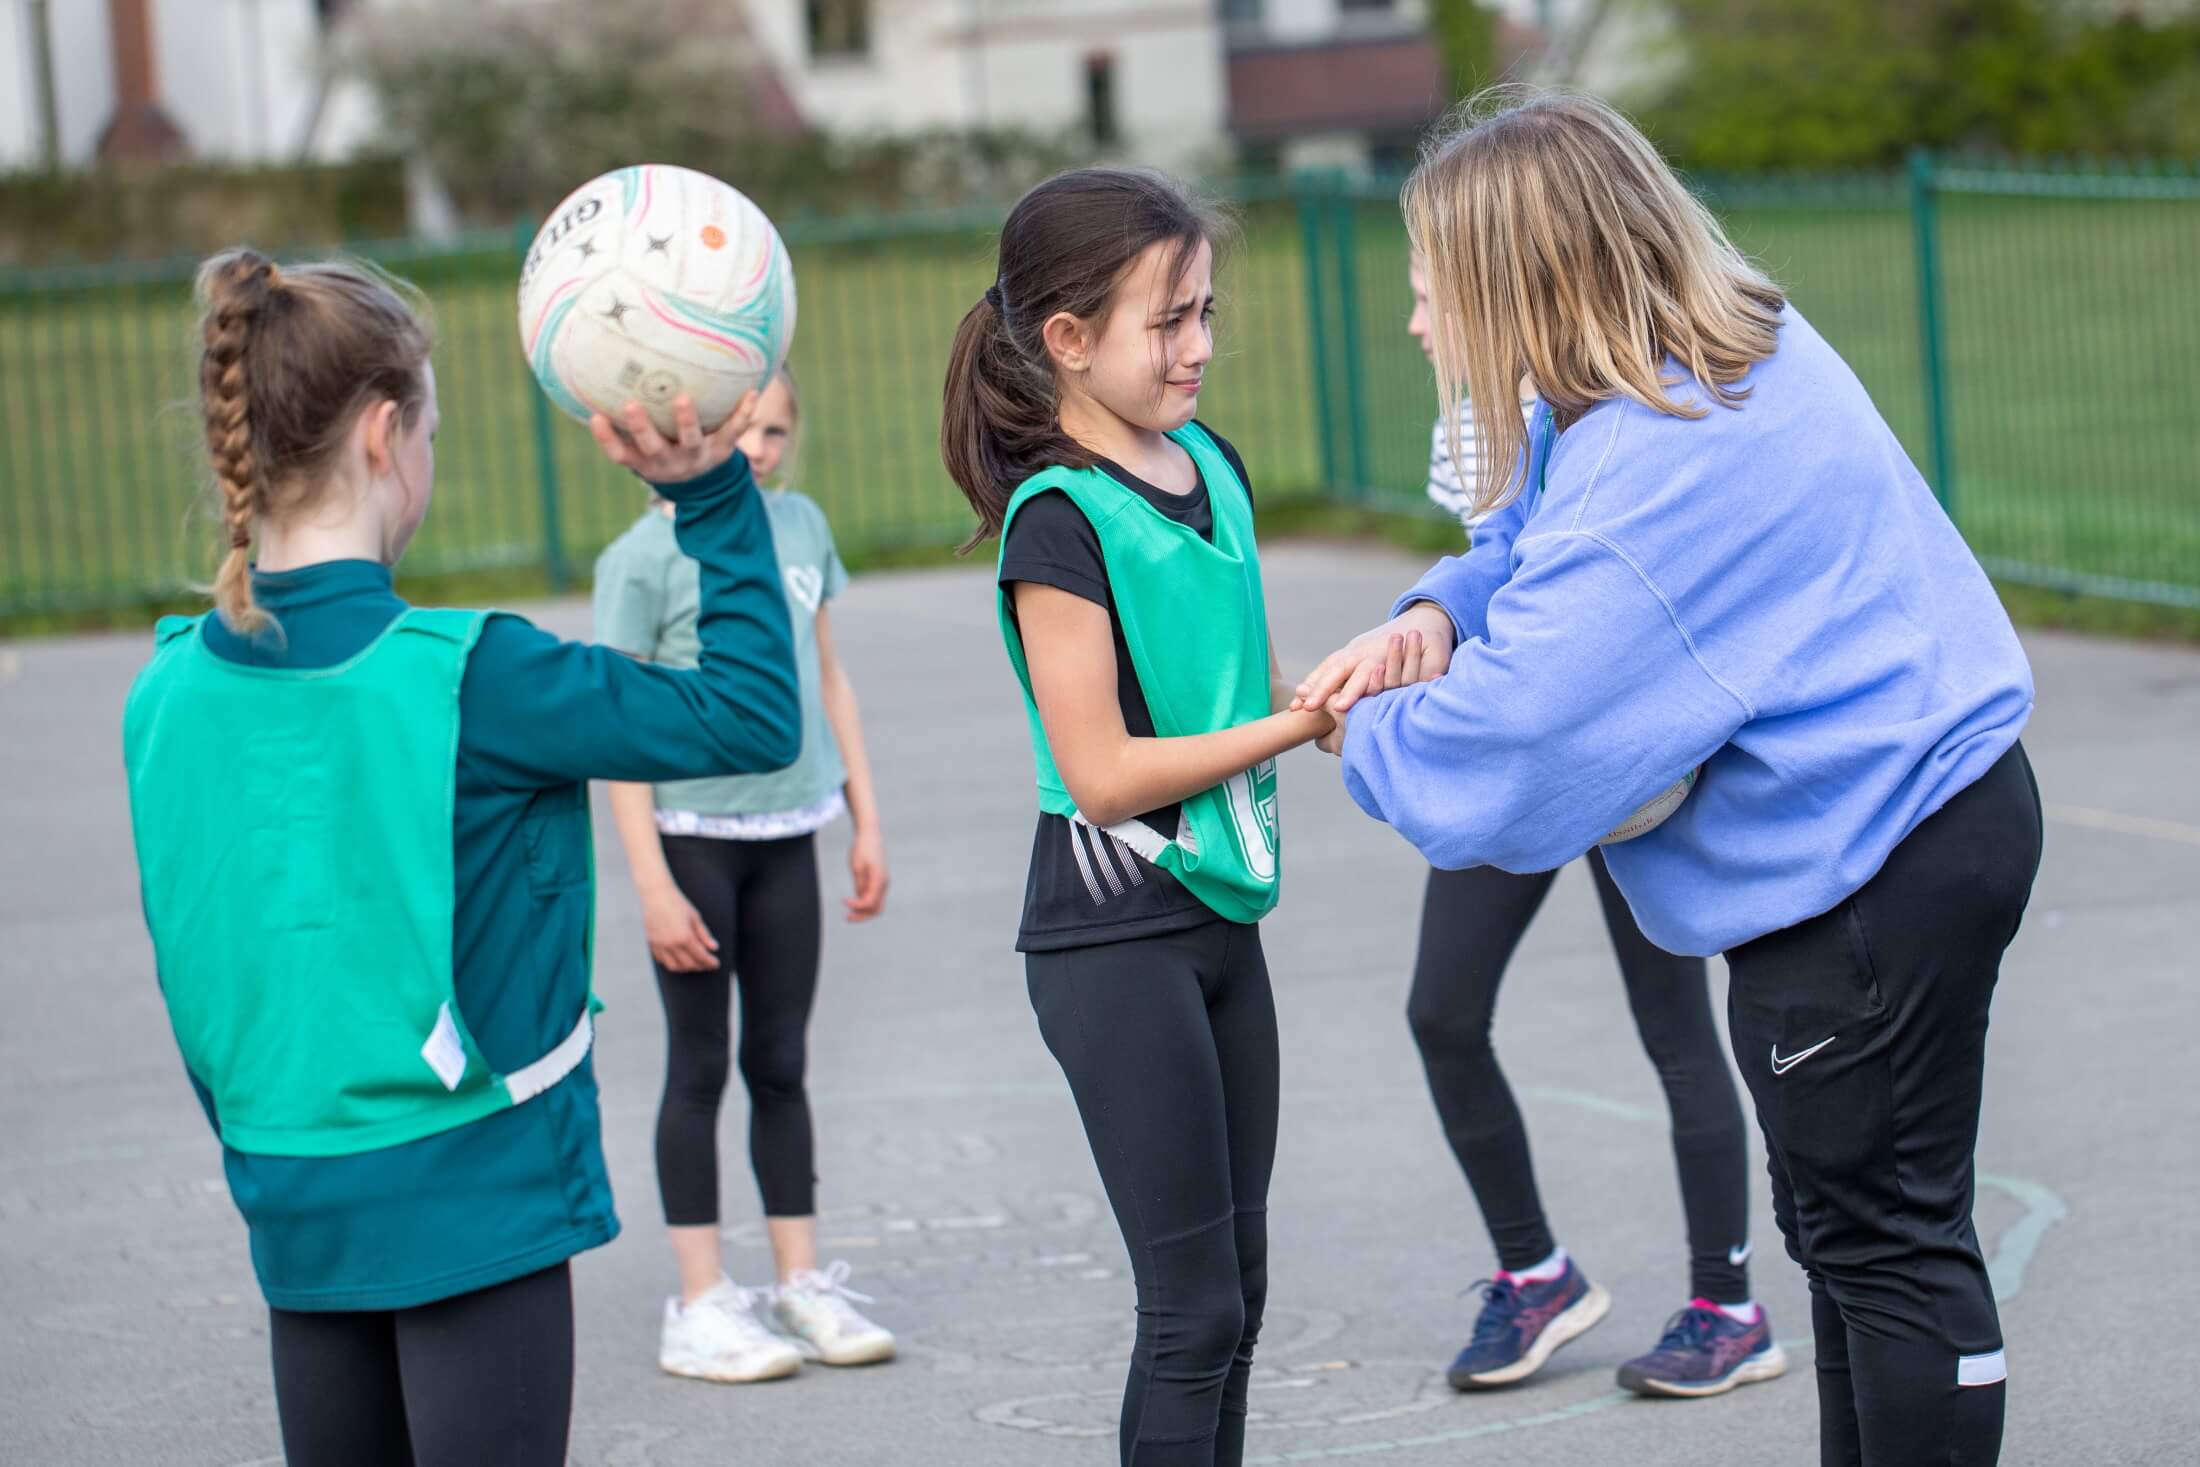 Coach helps a young girl who is visibly upset after hurting her hand playing netball